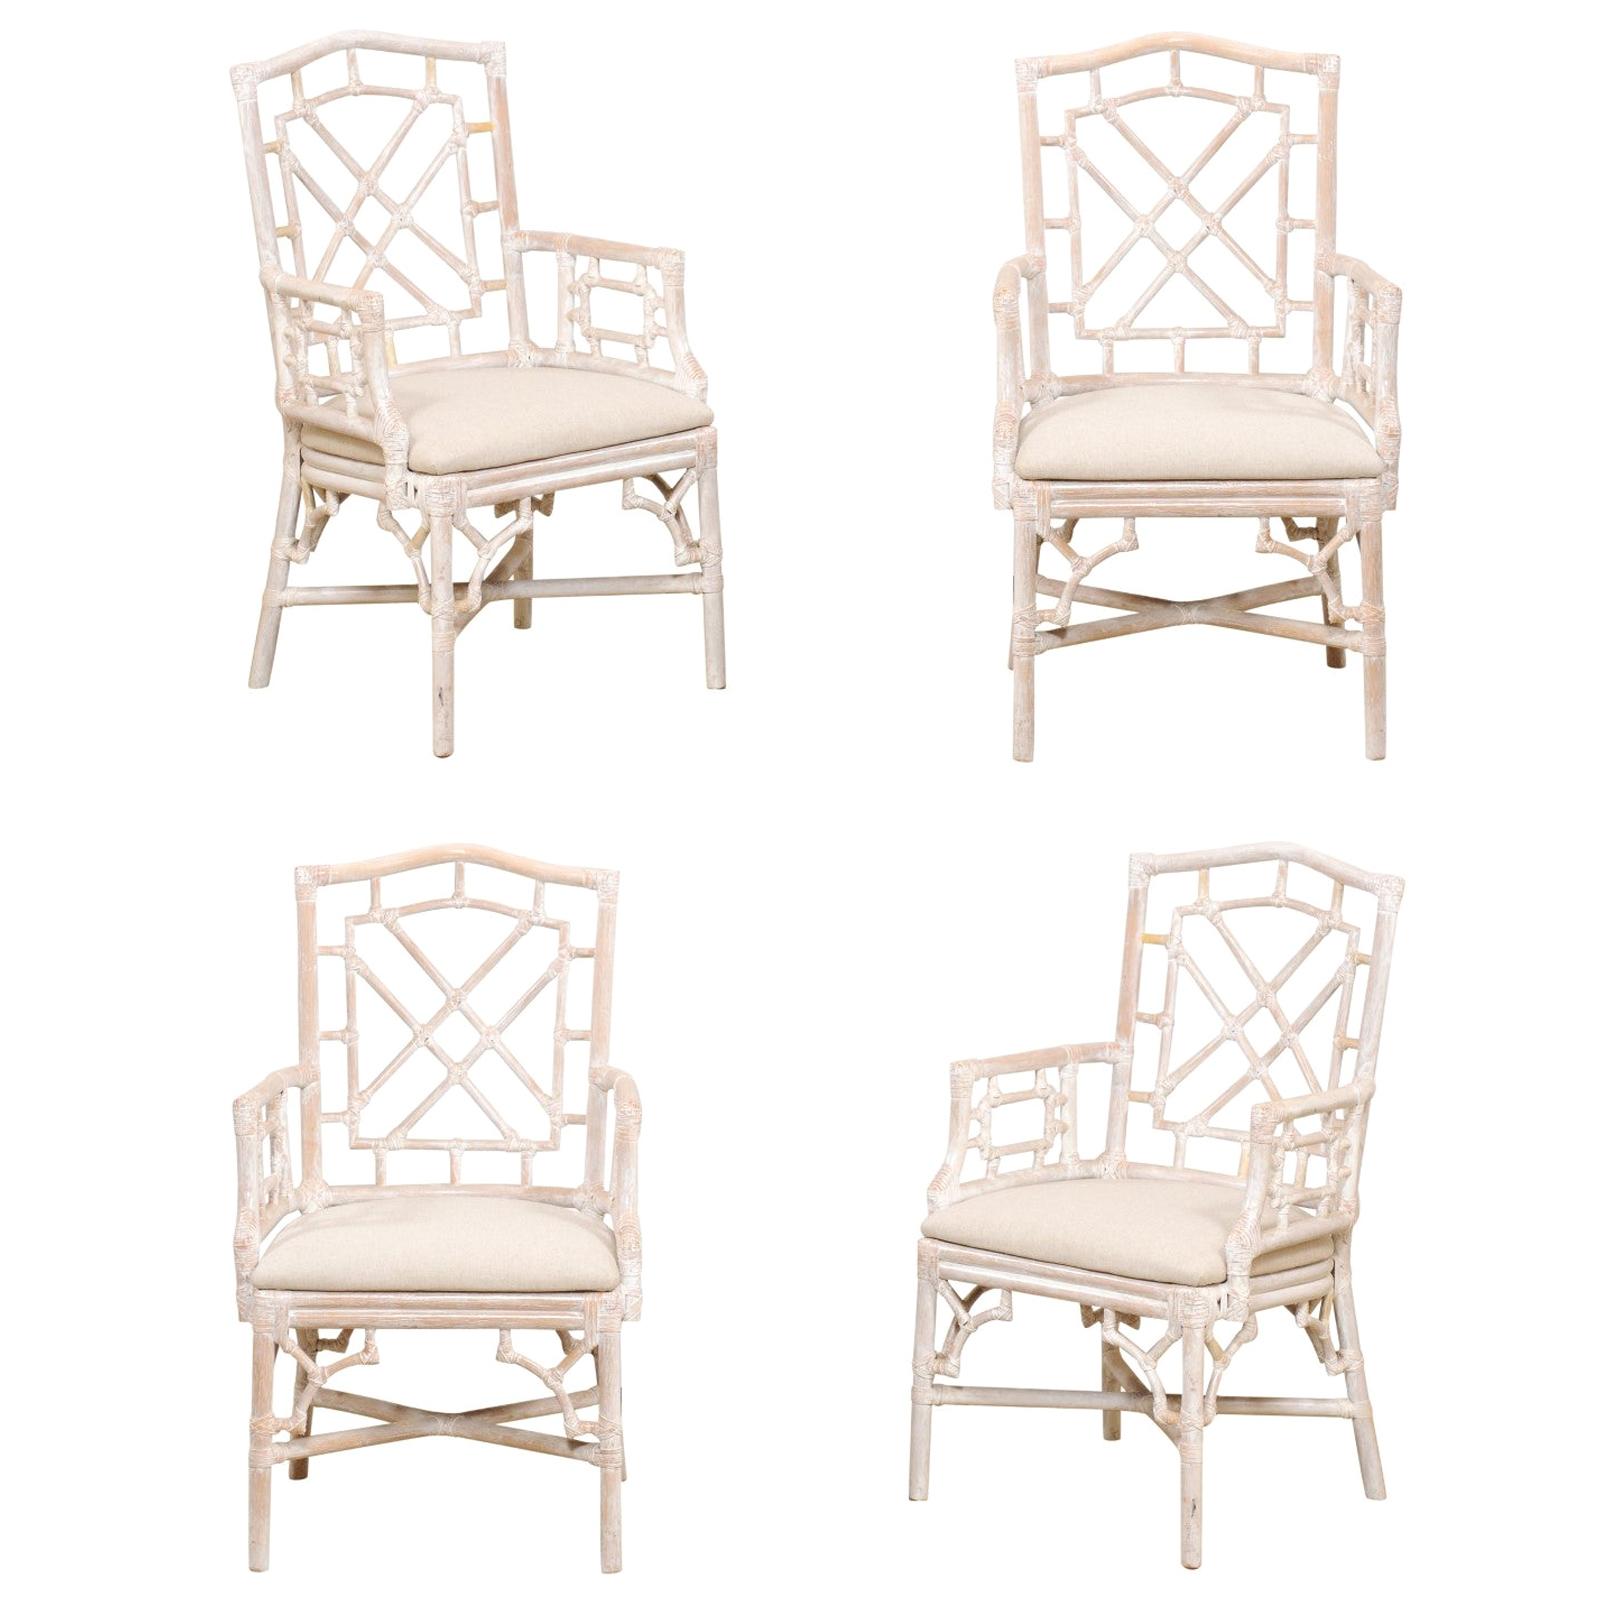 Set of 4 Vintage Faux Bamboo Carved Armchairs with Newly Upholstered Seats 